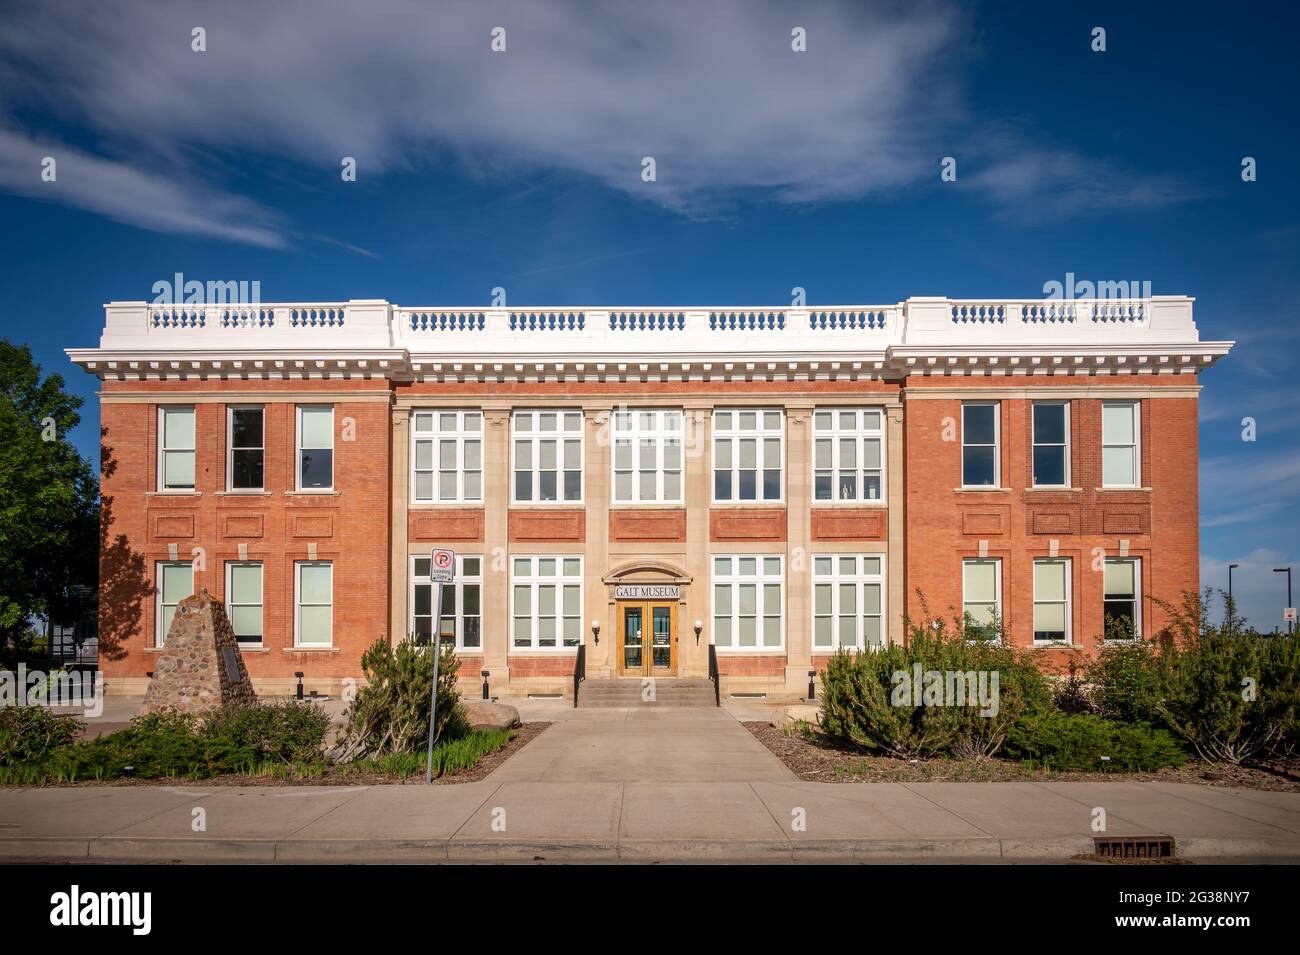 Lethbridge, Alberta - June 13, 2021: The exterior facade and grounds of the Galt Museum in Lethbridge. Stock Photo